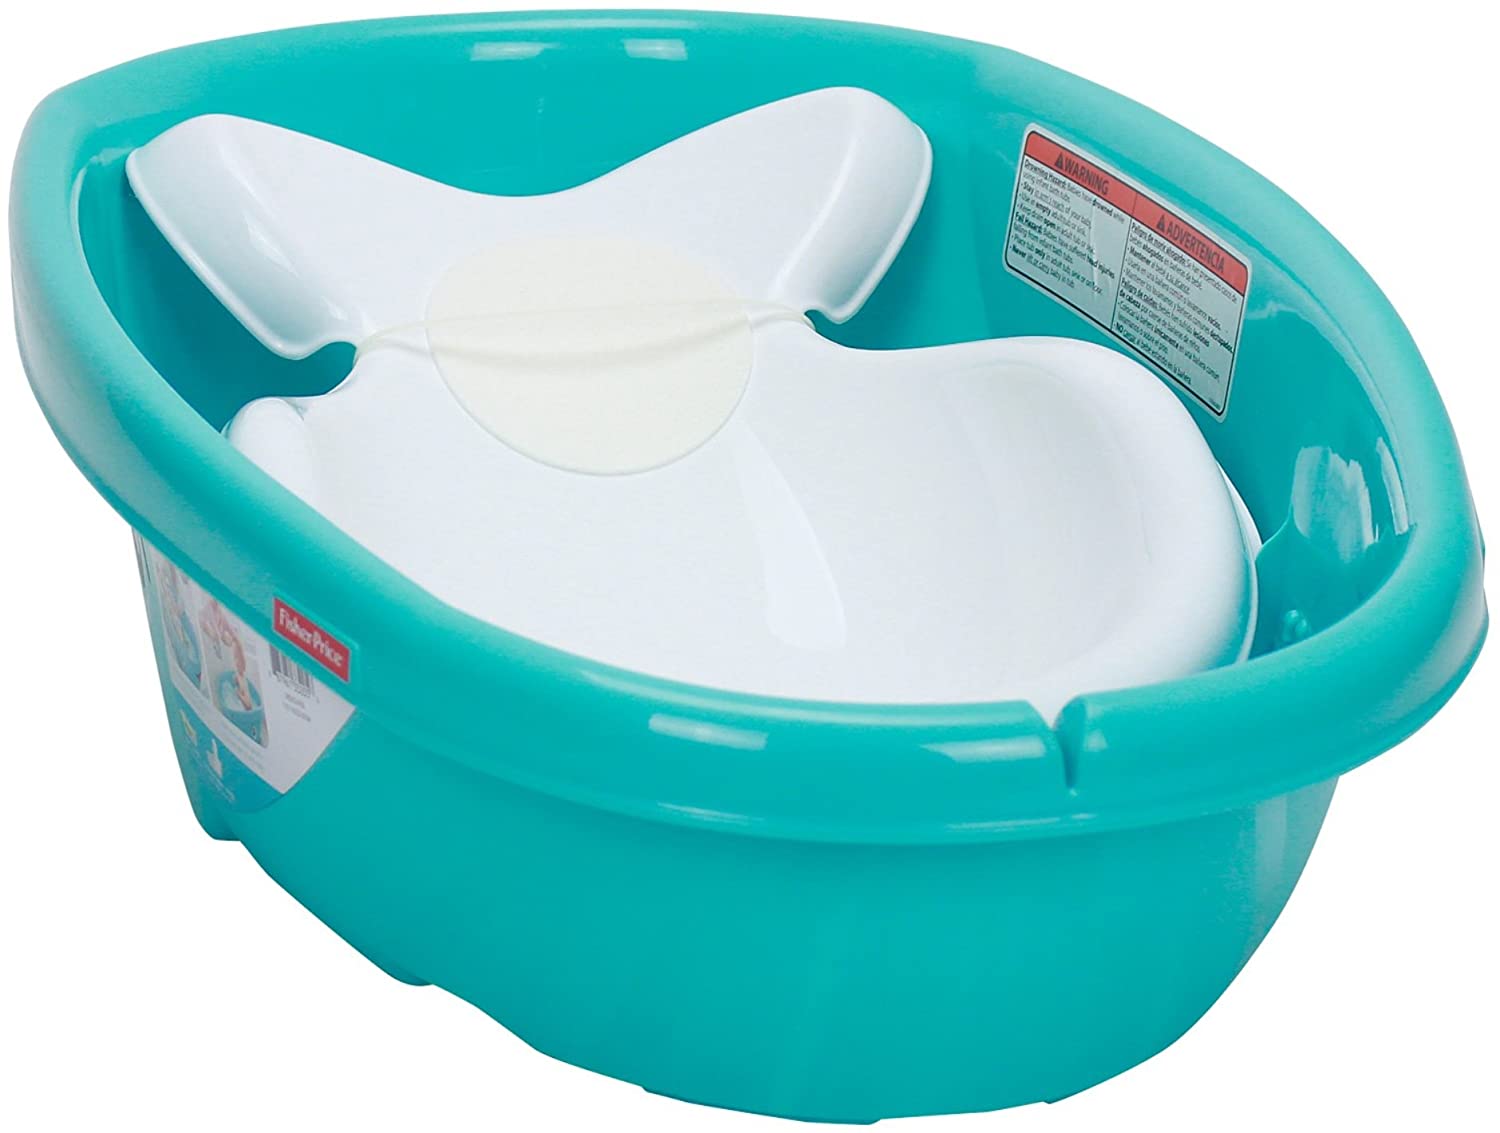 Top 7 Best Infant Tubs For Newborn Reviews in 2022 2